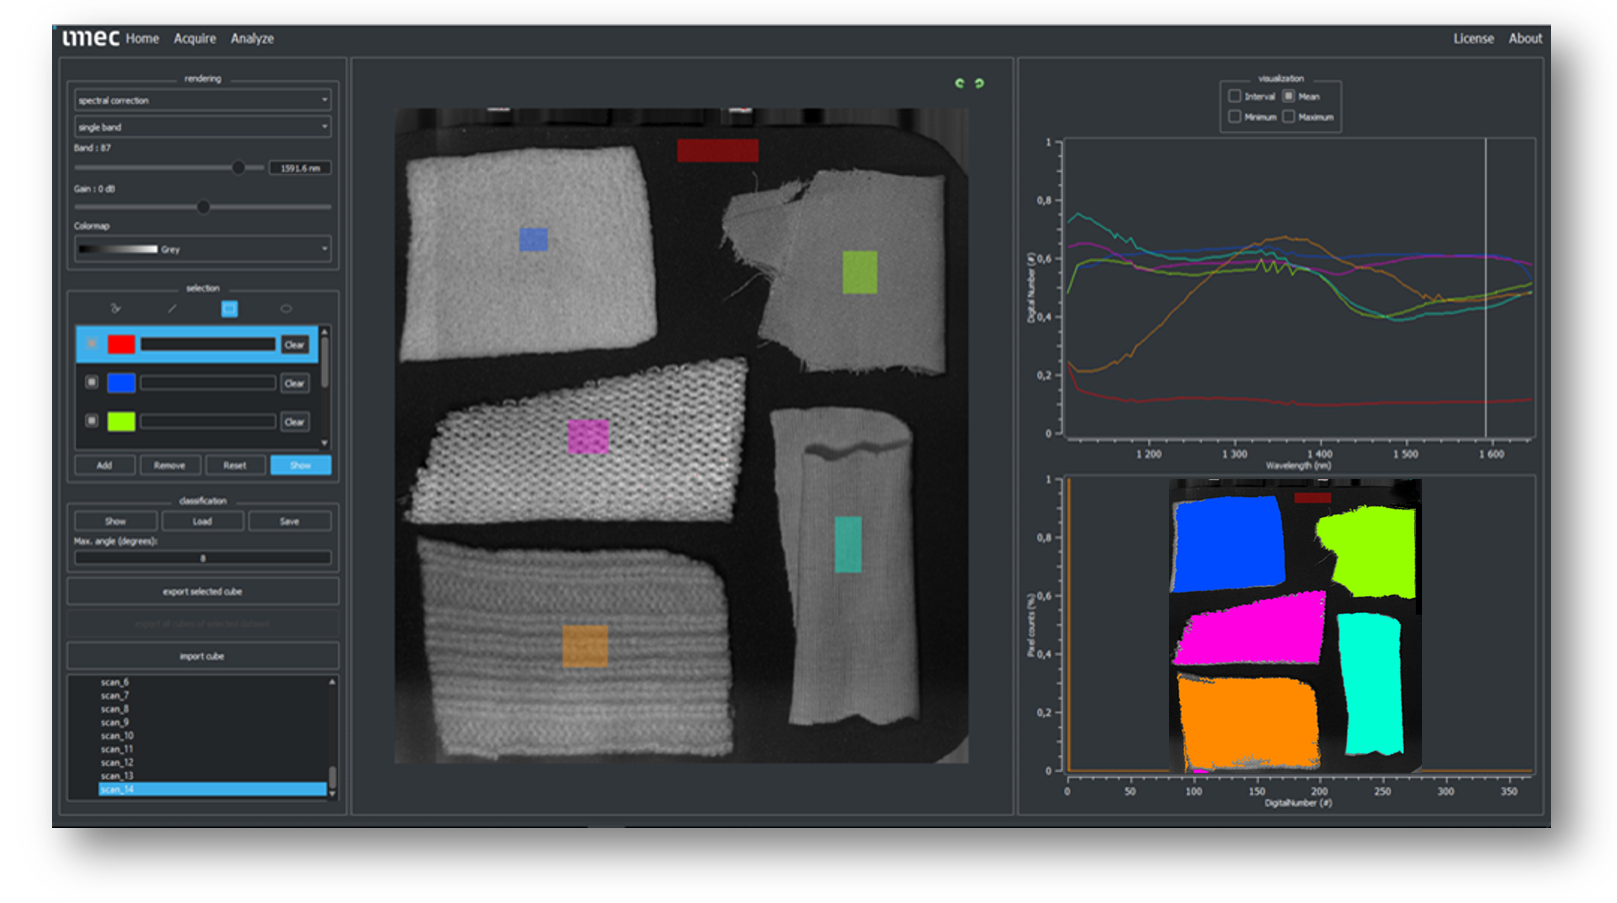 Hyperspectral imaging in SWIR range with imec LS 100+ bands in 1.1 – 1.7um range enables classification of various different textiles